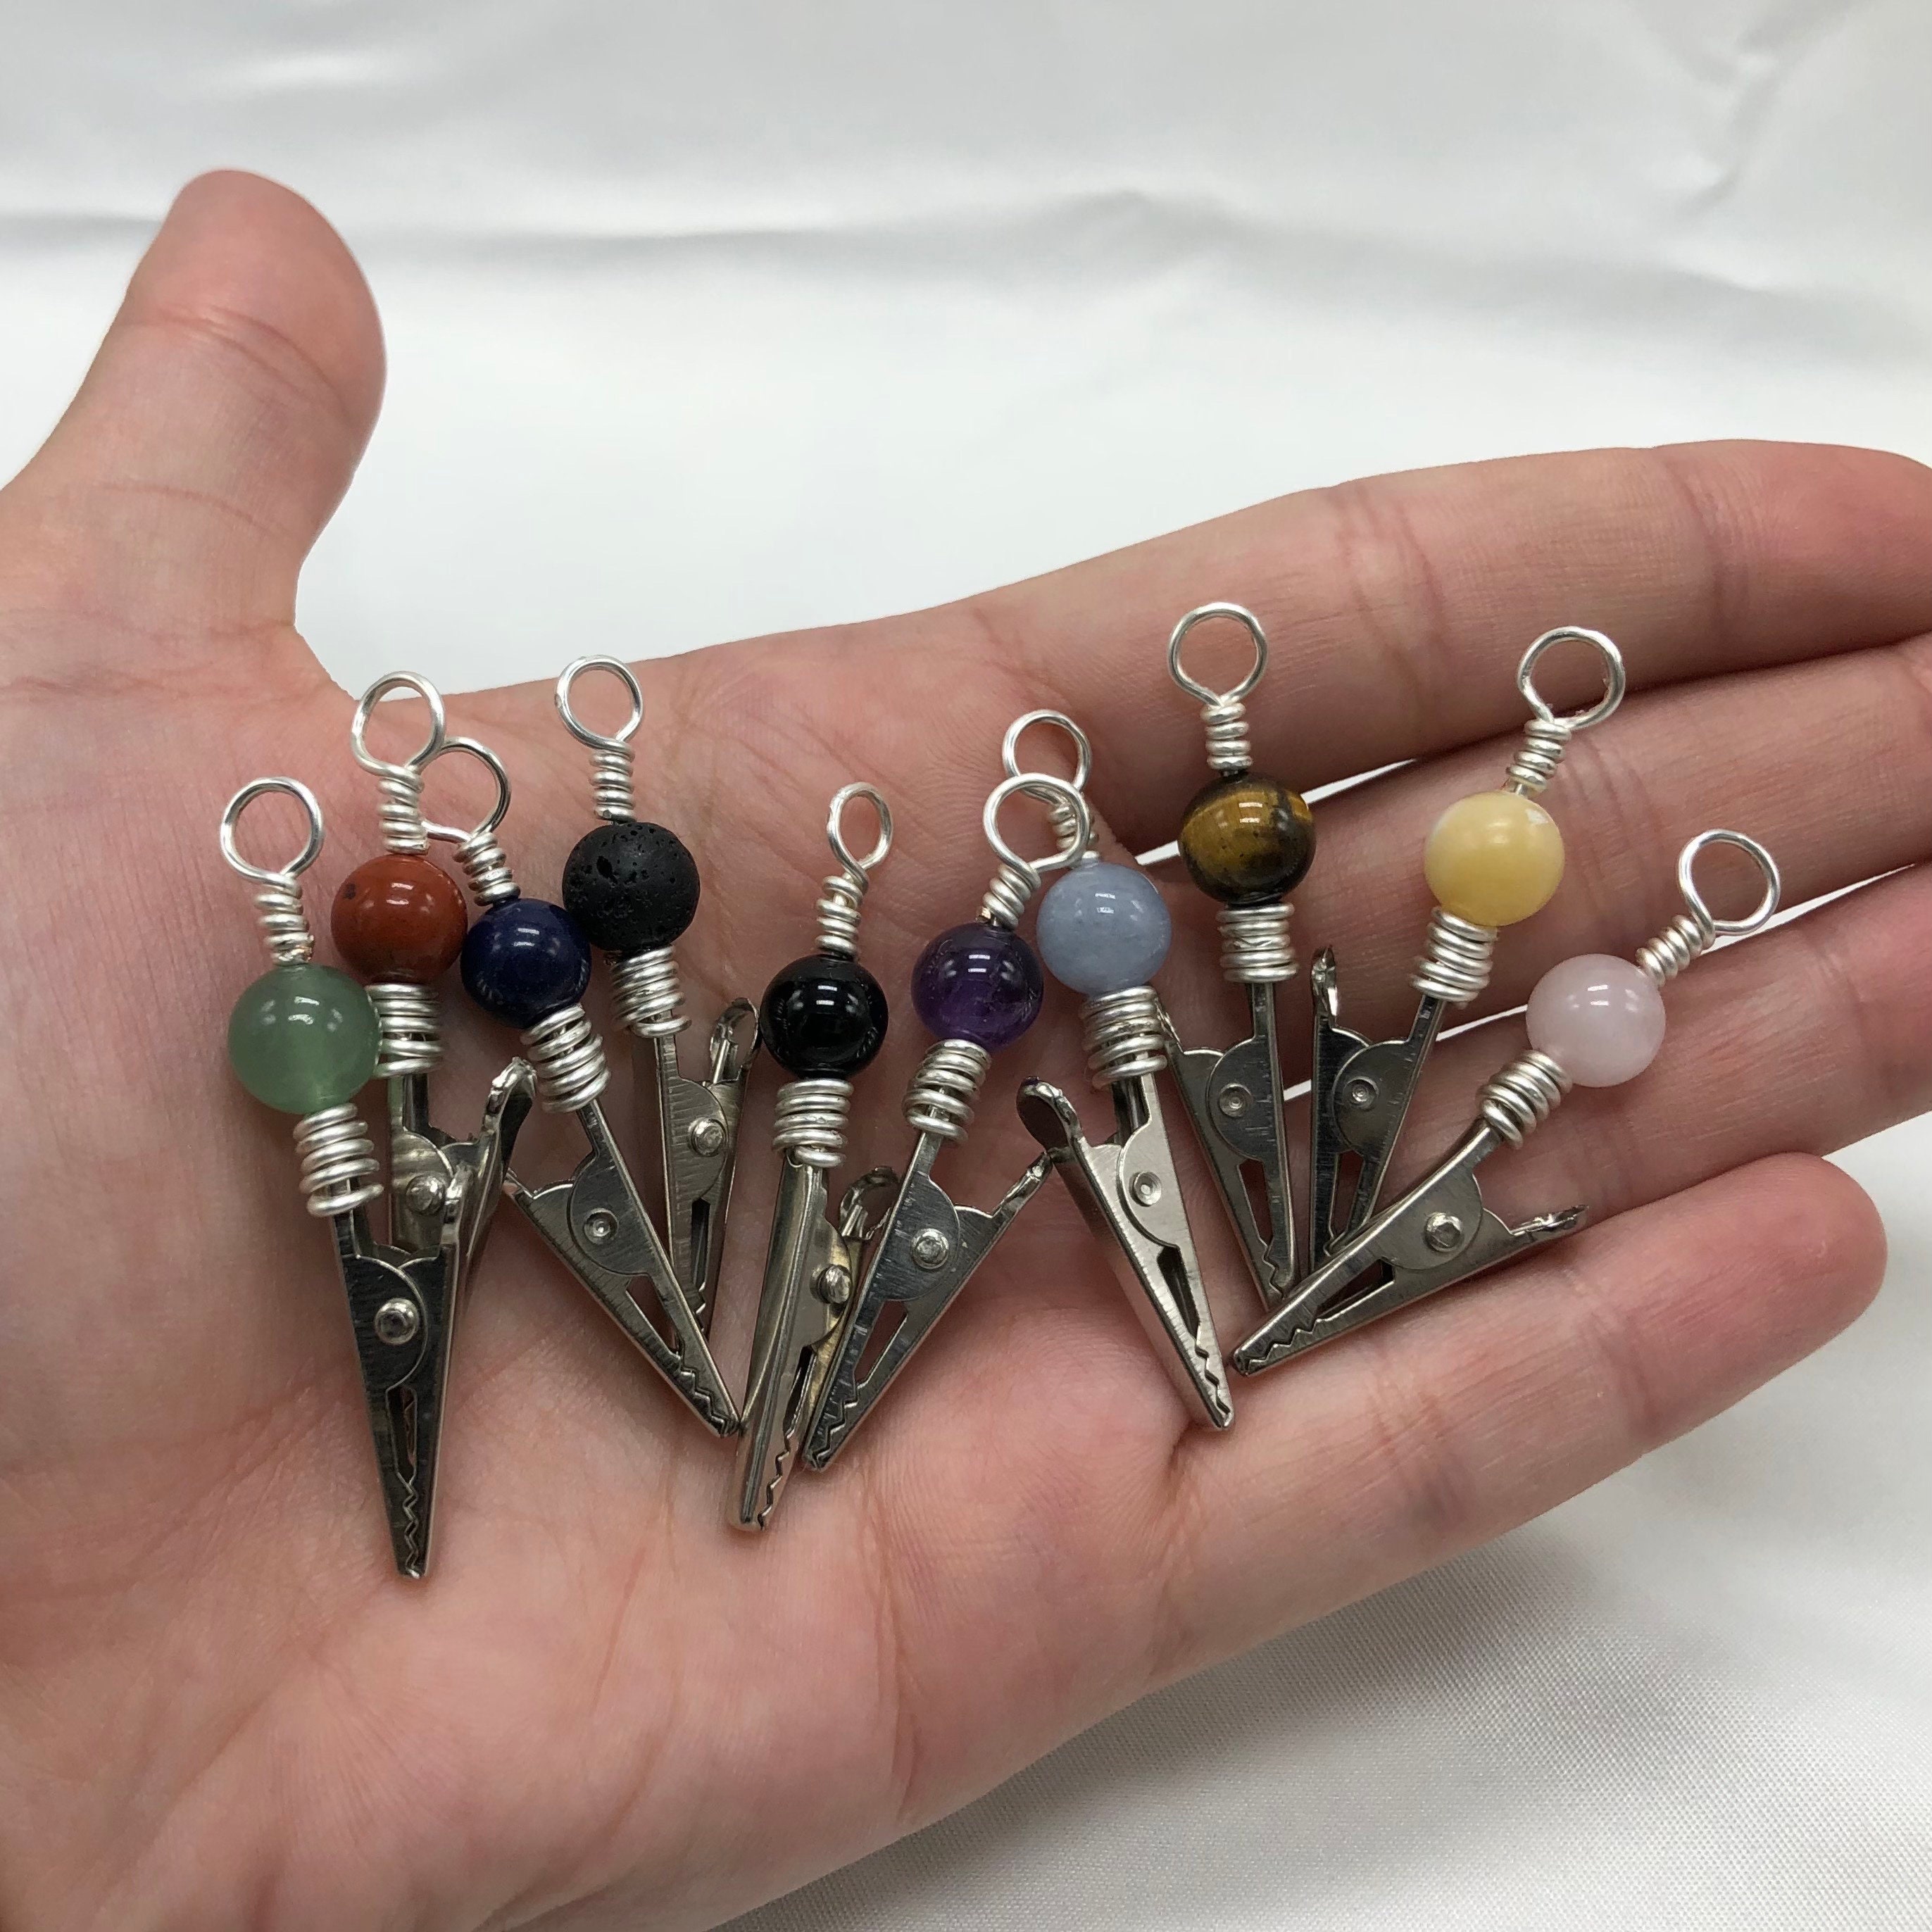 CUSTOM roach clips unique designs options colors smokers gift